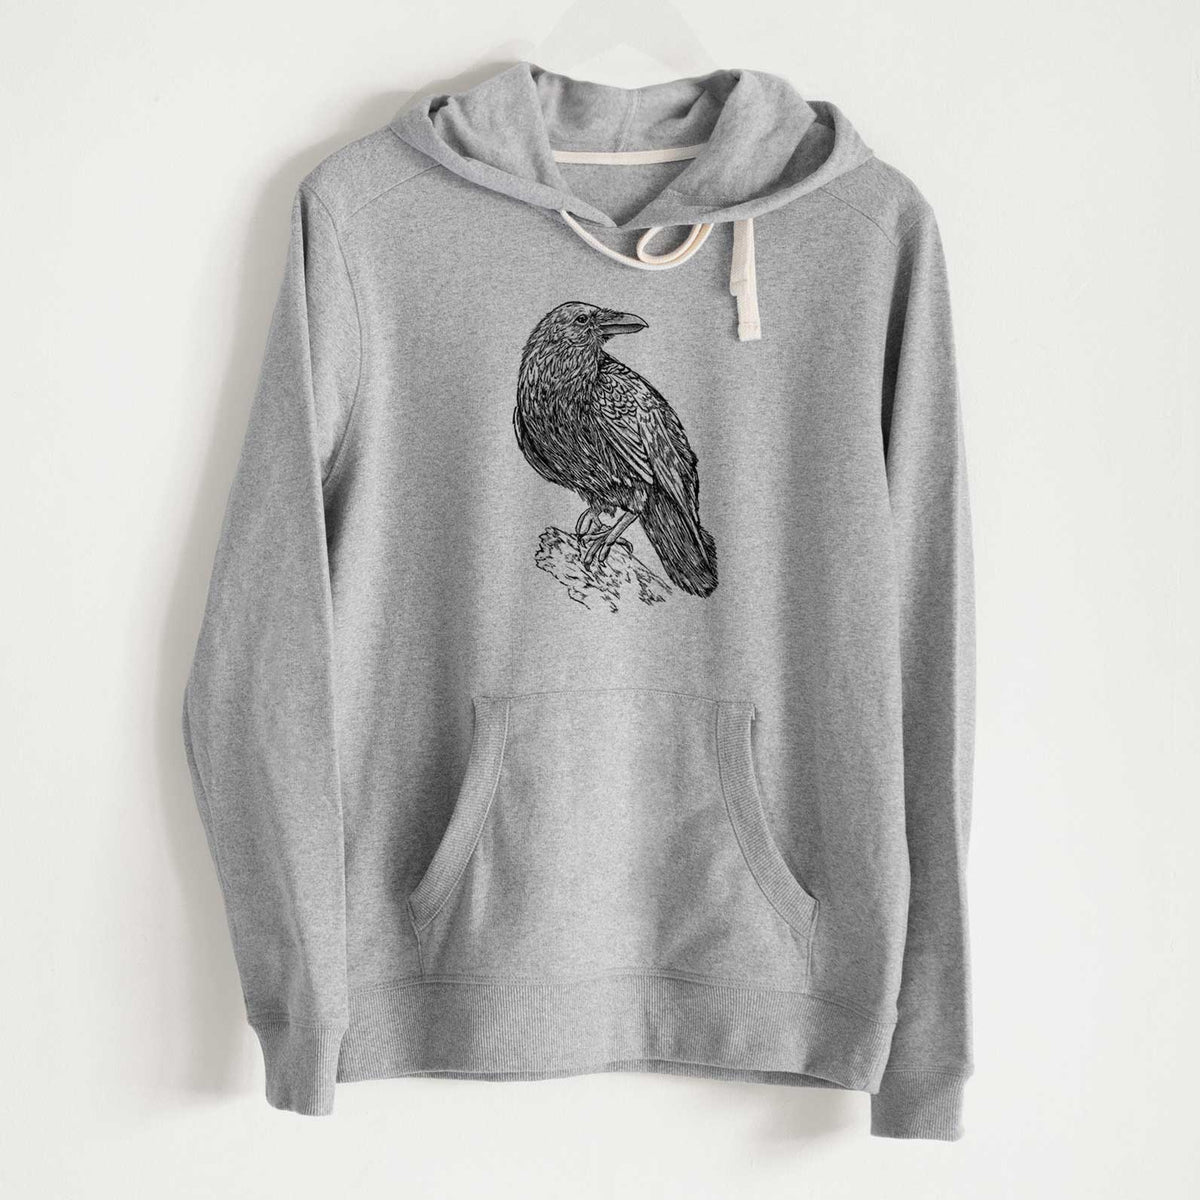 Corvus corax - Common Raven - Unisex Recycled Hoodie - CLOSEOUT - FINAL SALE